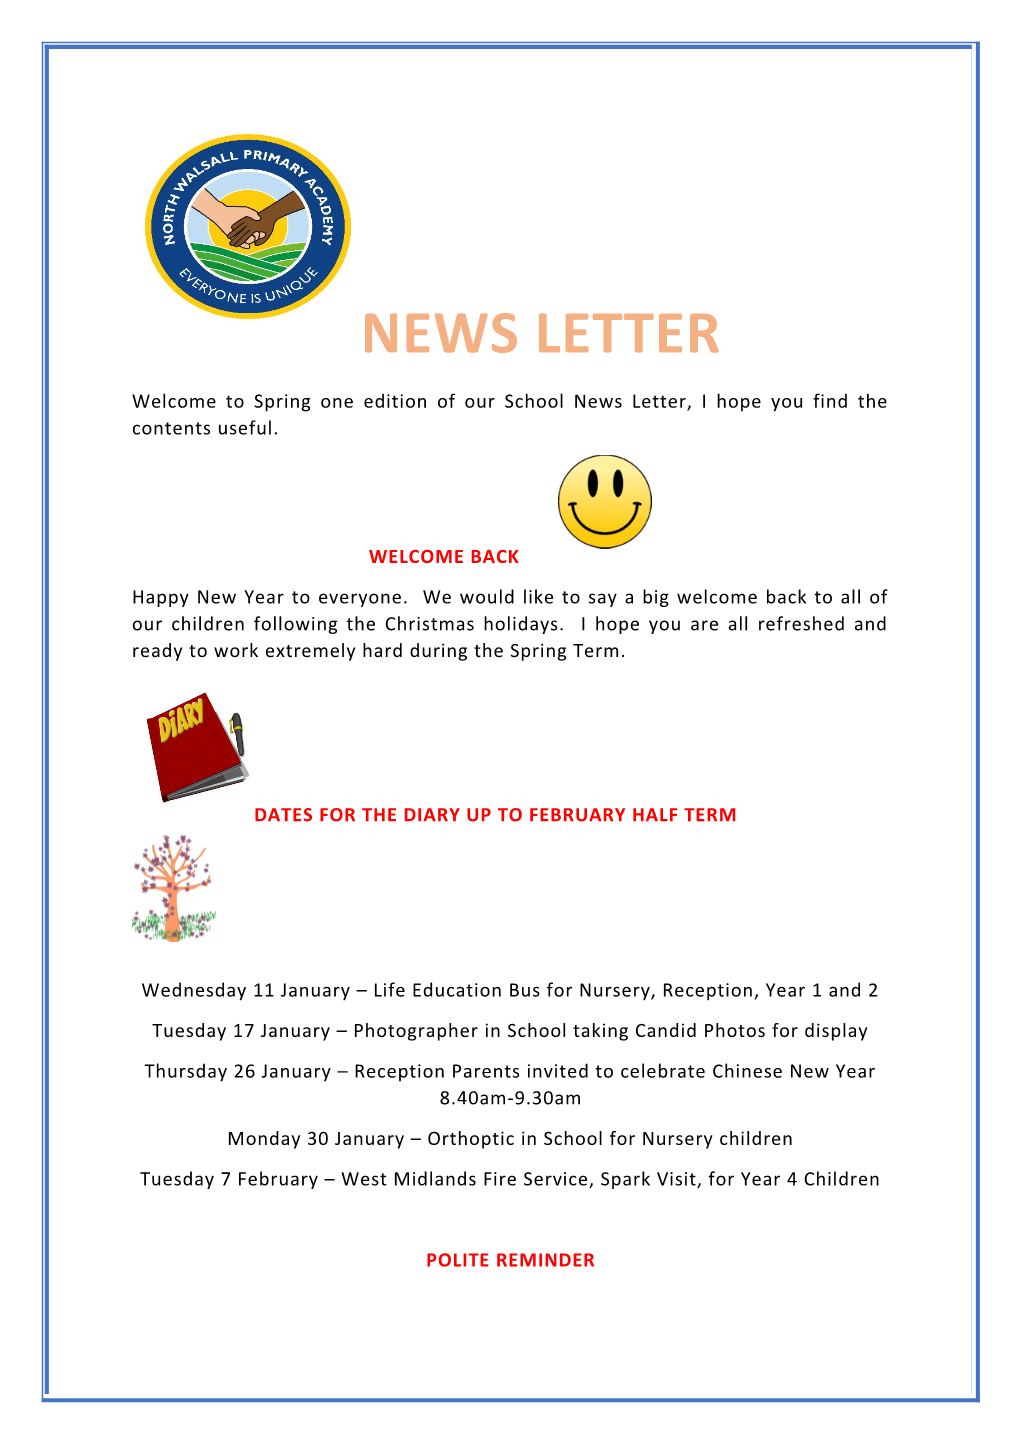 Welcome to Spring One Edition of Our School News Letter, I Hope You Find the Contents Useful